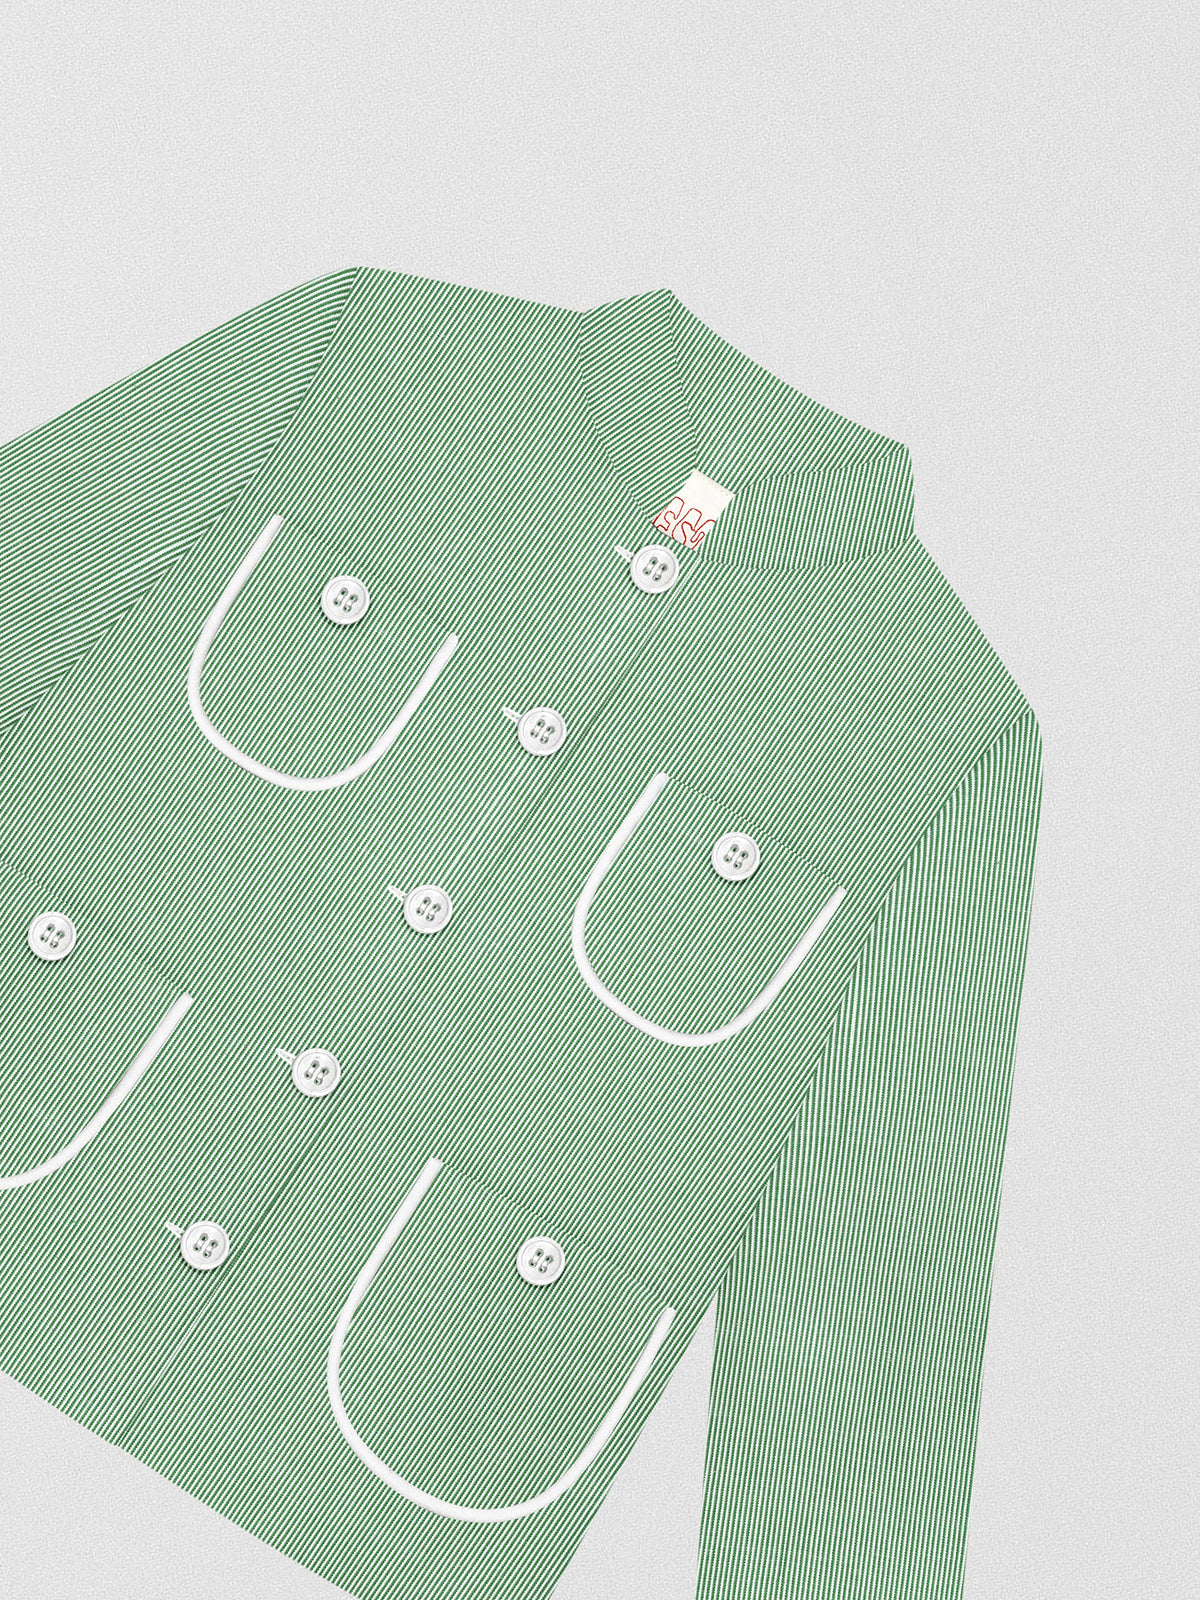 Buttoned jacket made in green and white stripes. It has contrasting white bias detail and four patch pockets. It has a mao collar and white button closure.